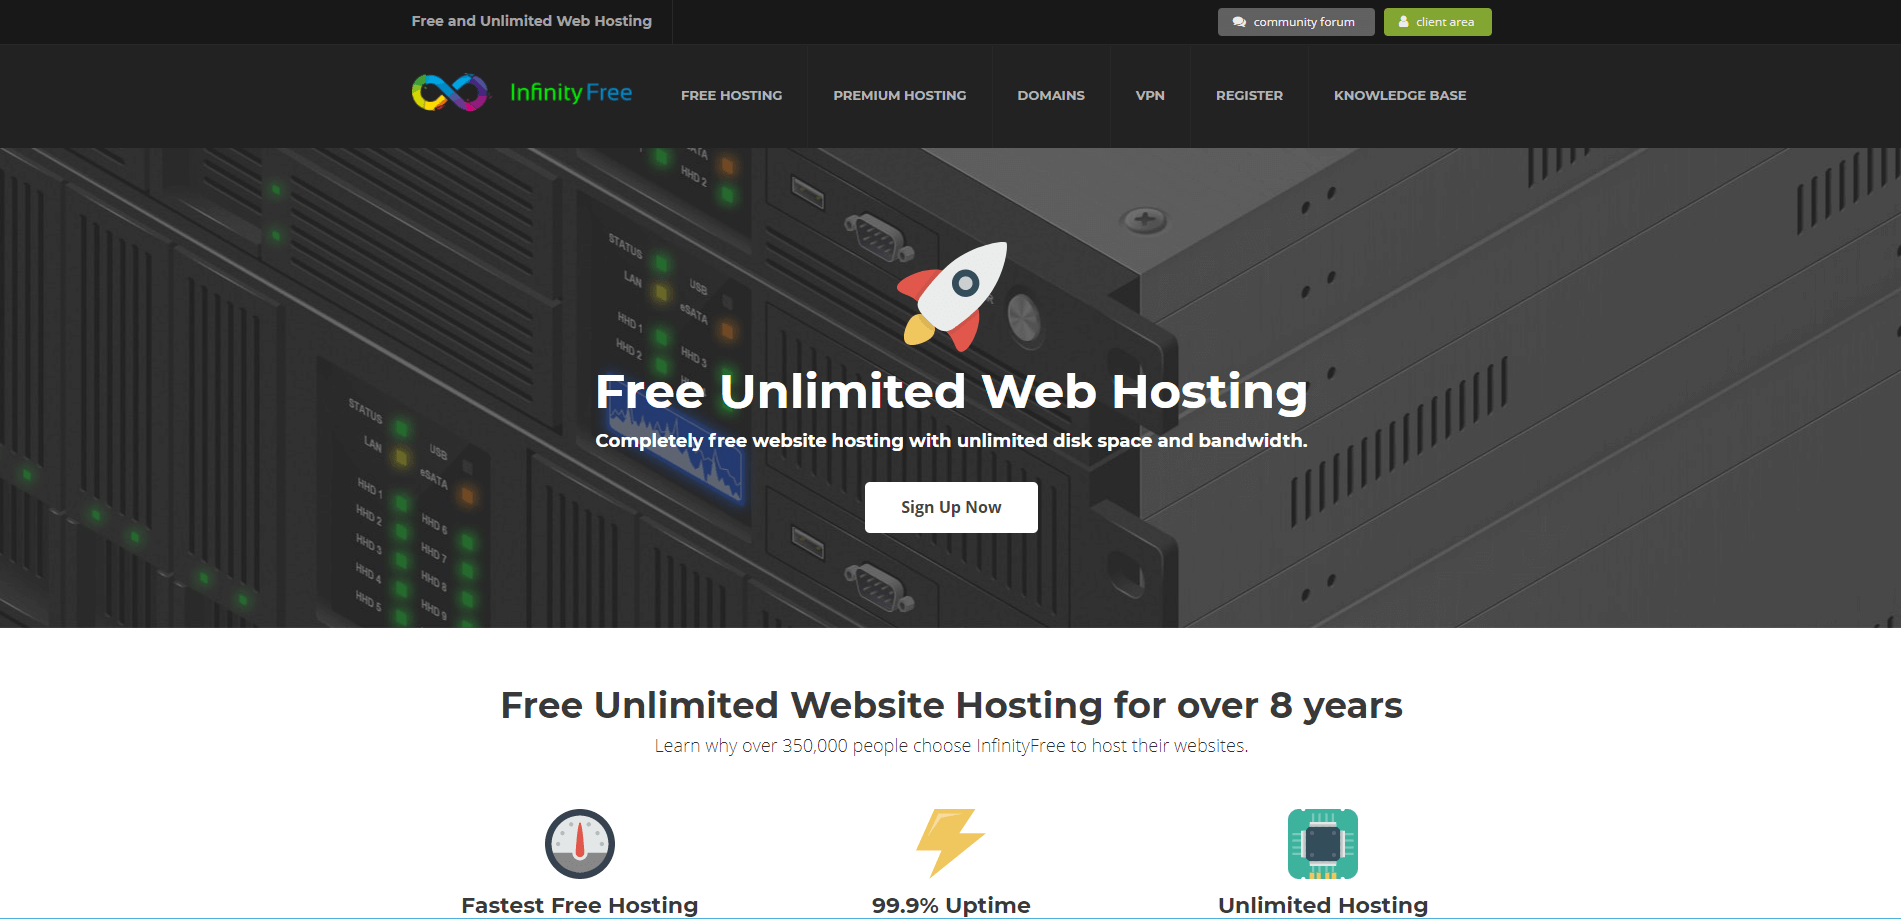 Free web hosting from InfinityFree.